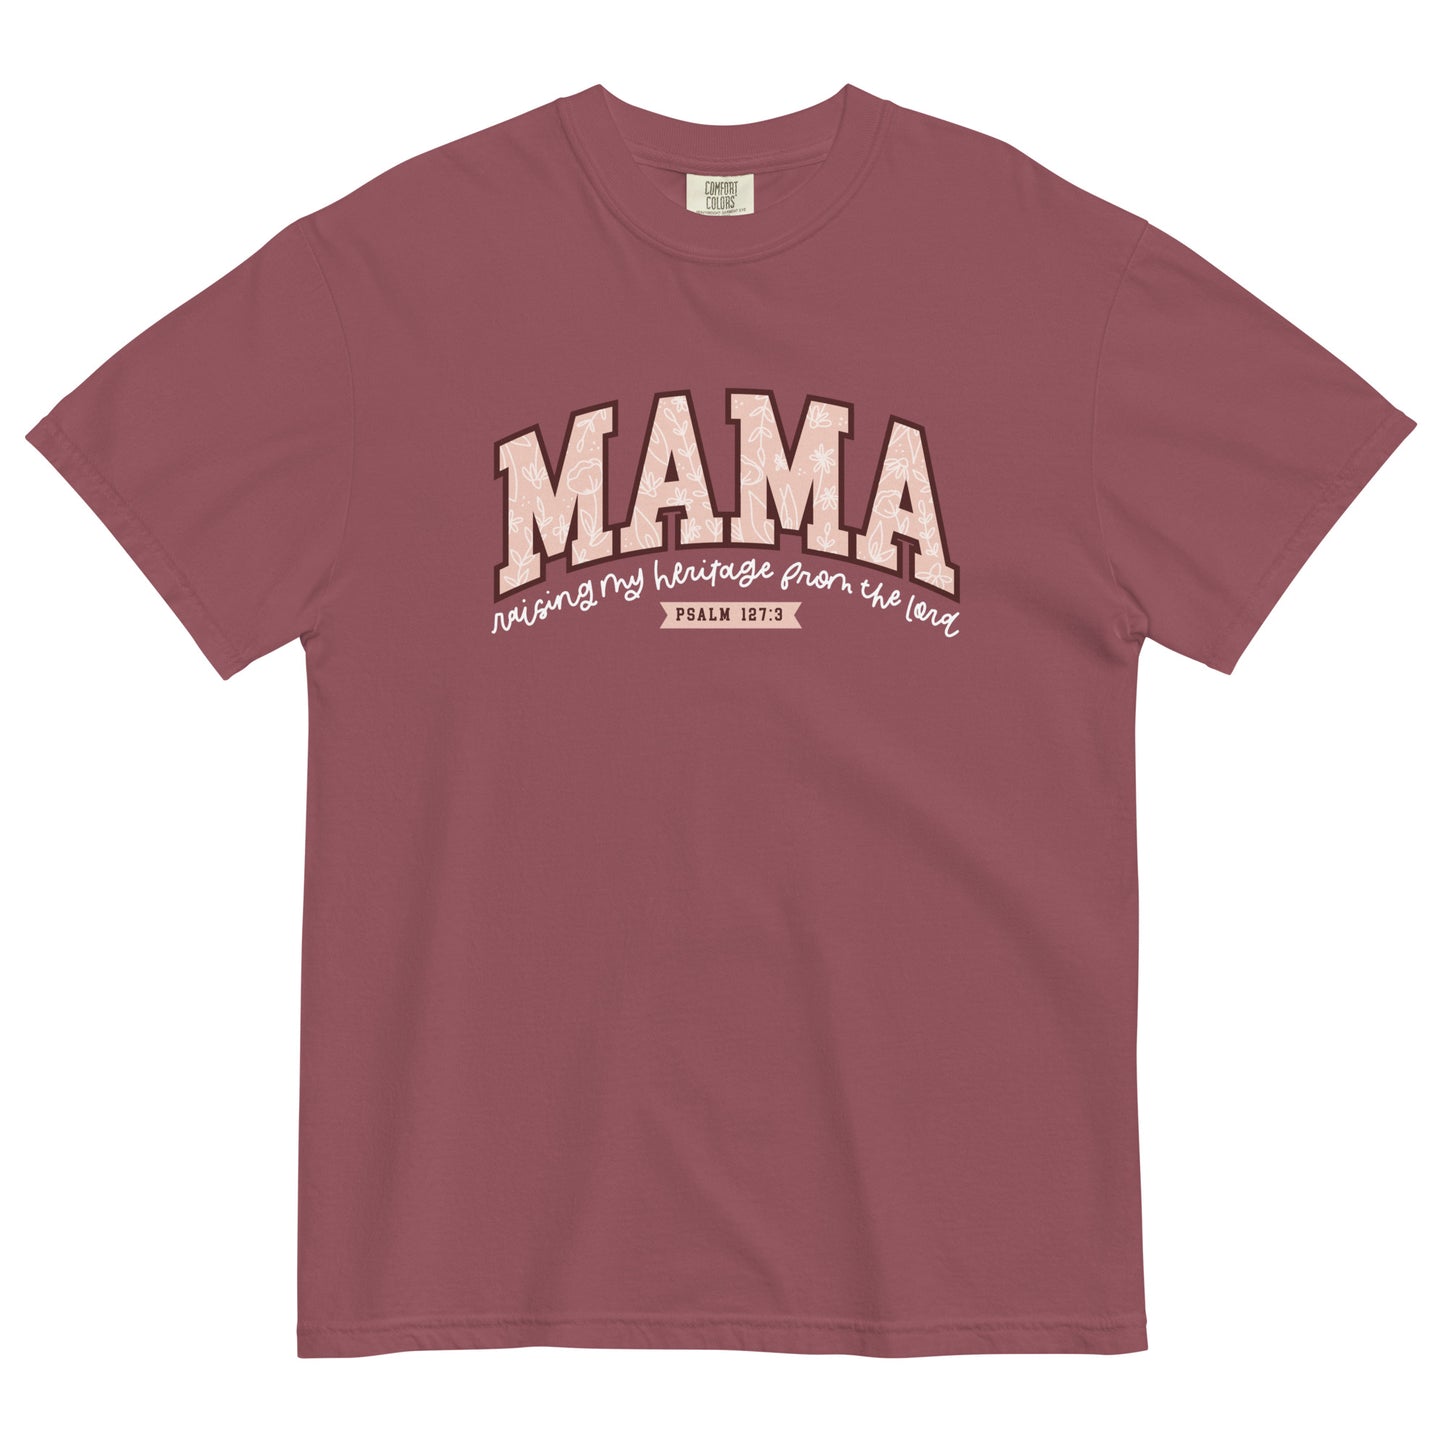 MAMA Heritage From the Lord Tee